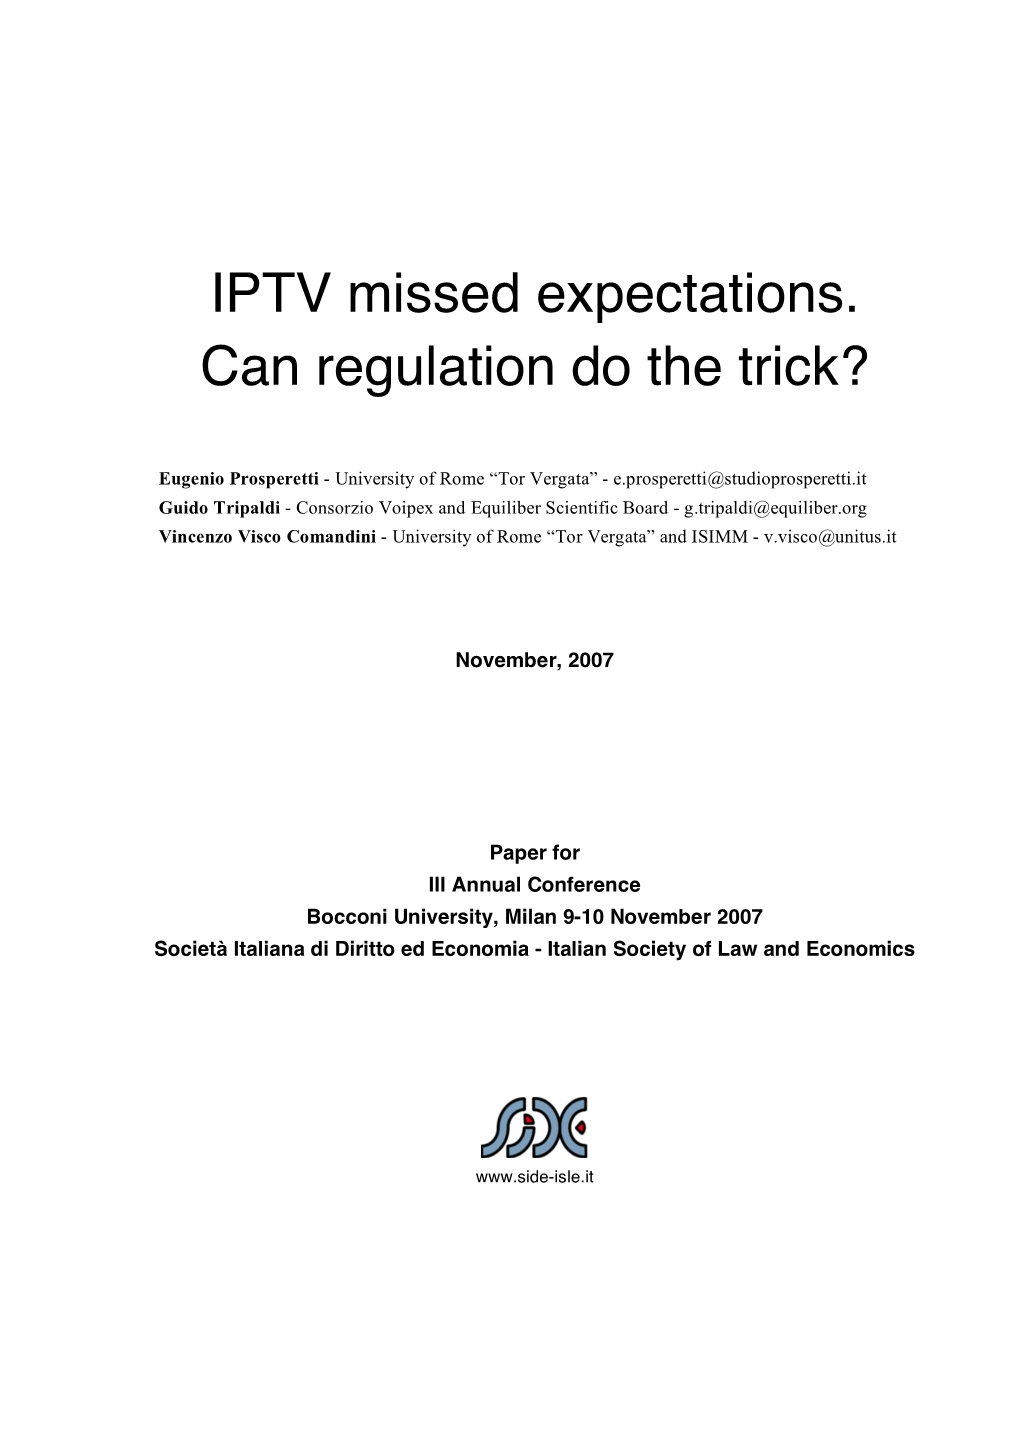 IPTV Missed Expectations. Can Regulation Do the Trick?